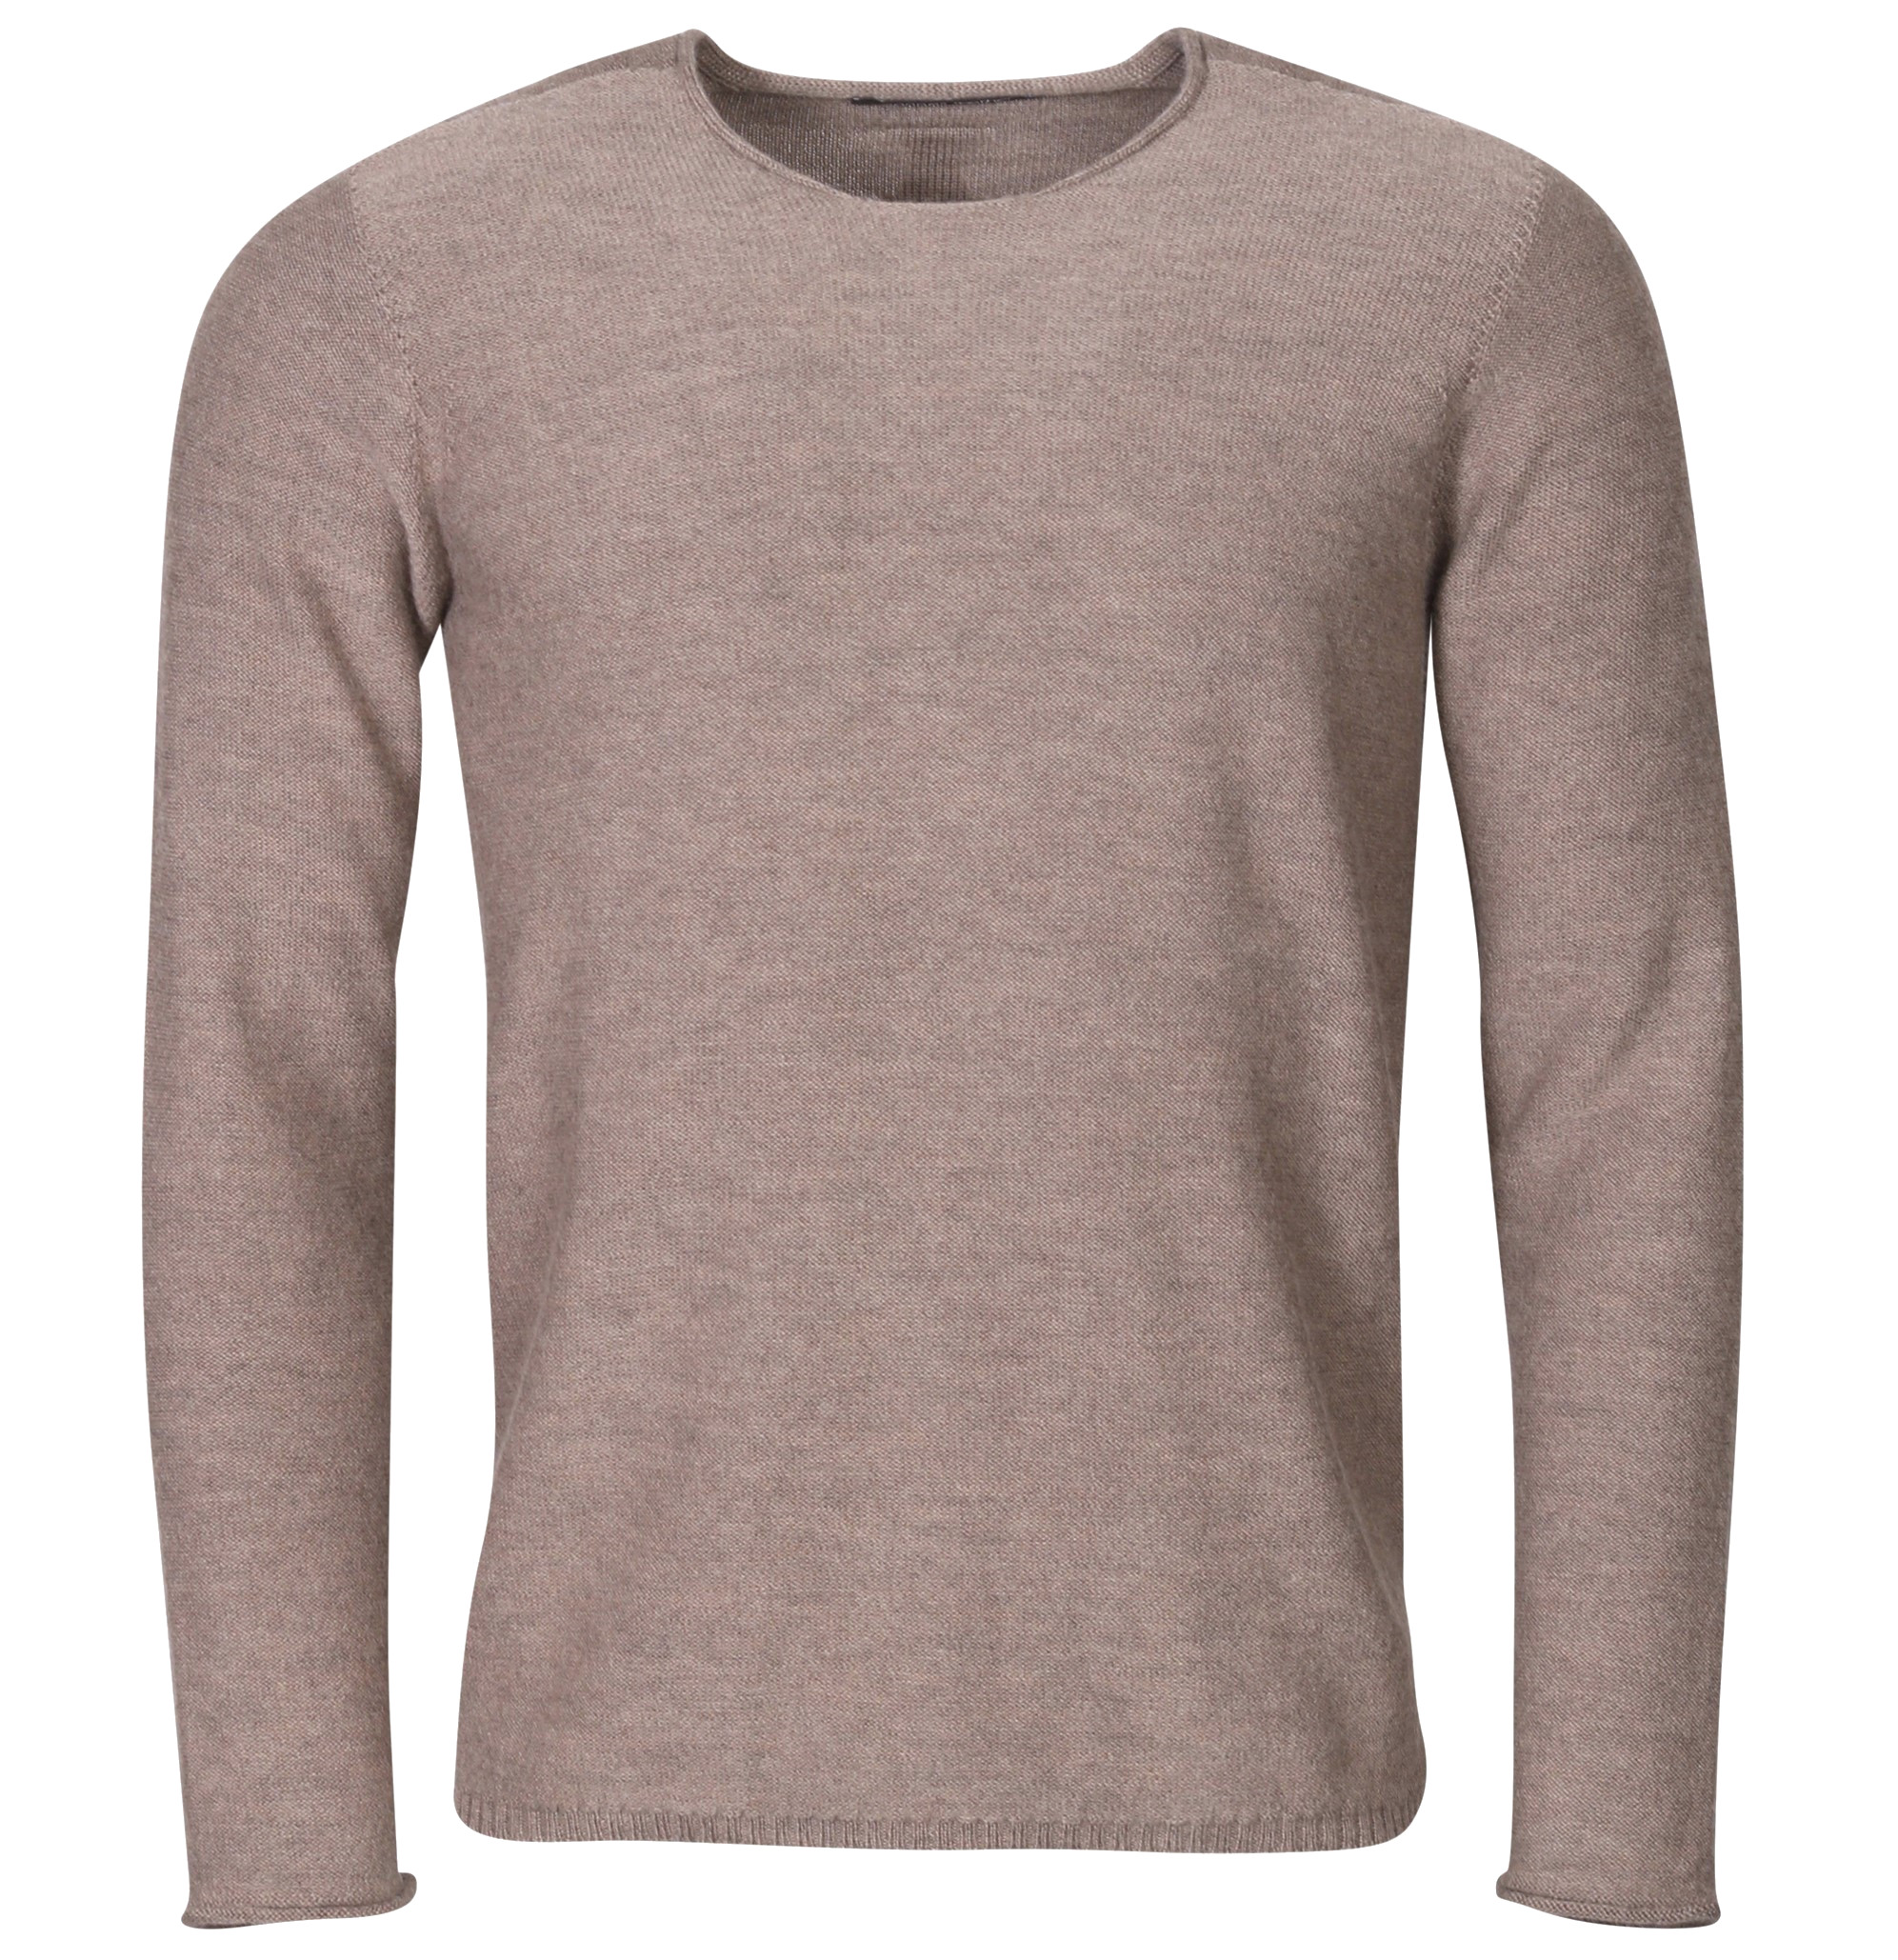 HANNES ROETHER Merino Knit Pullover in Light Brown